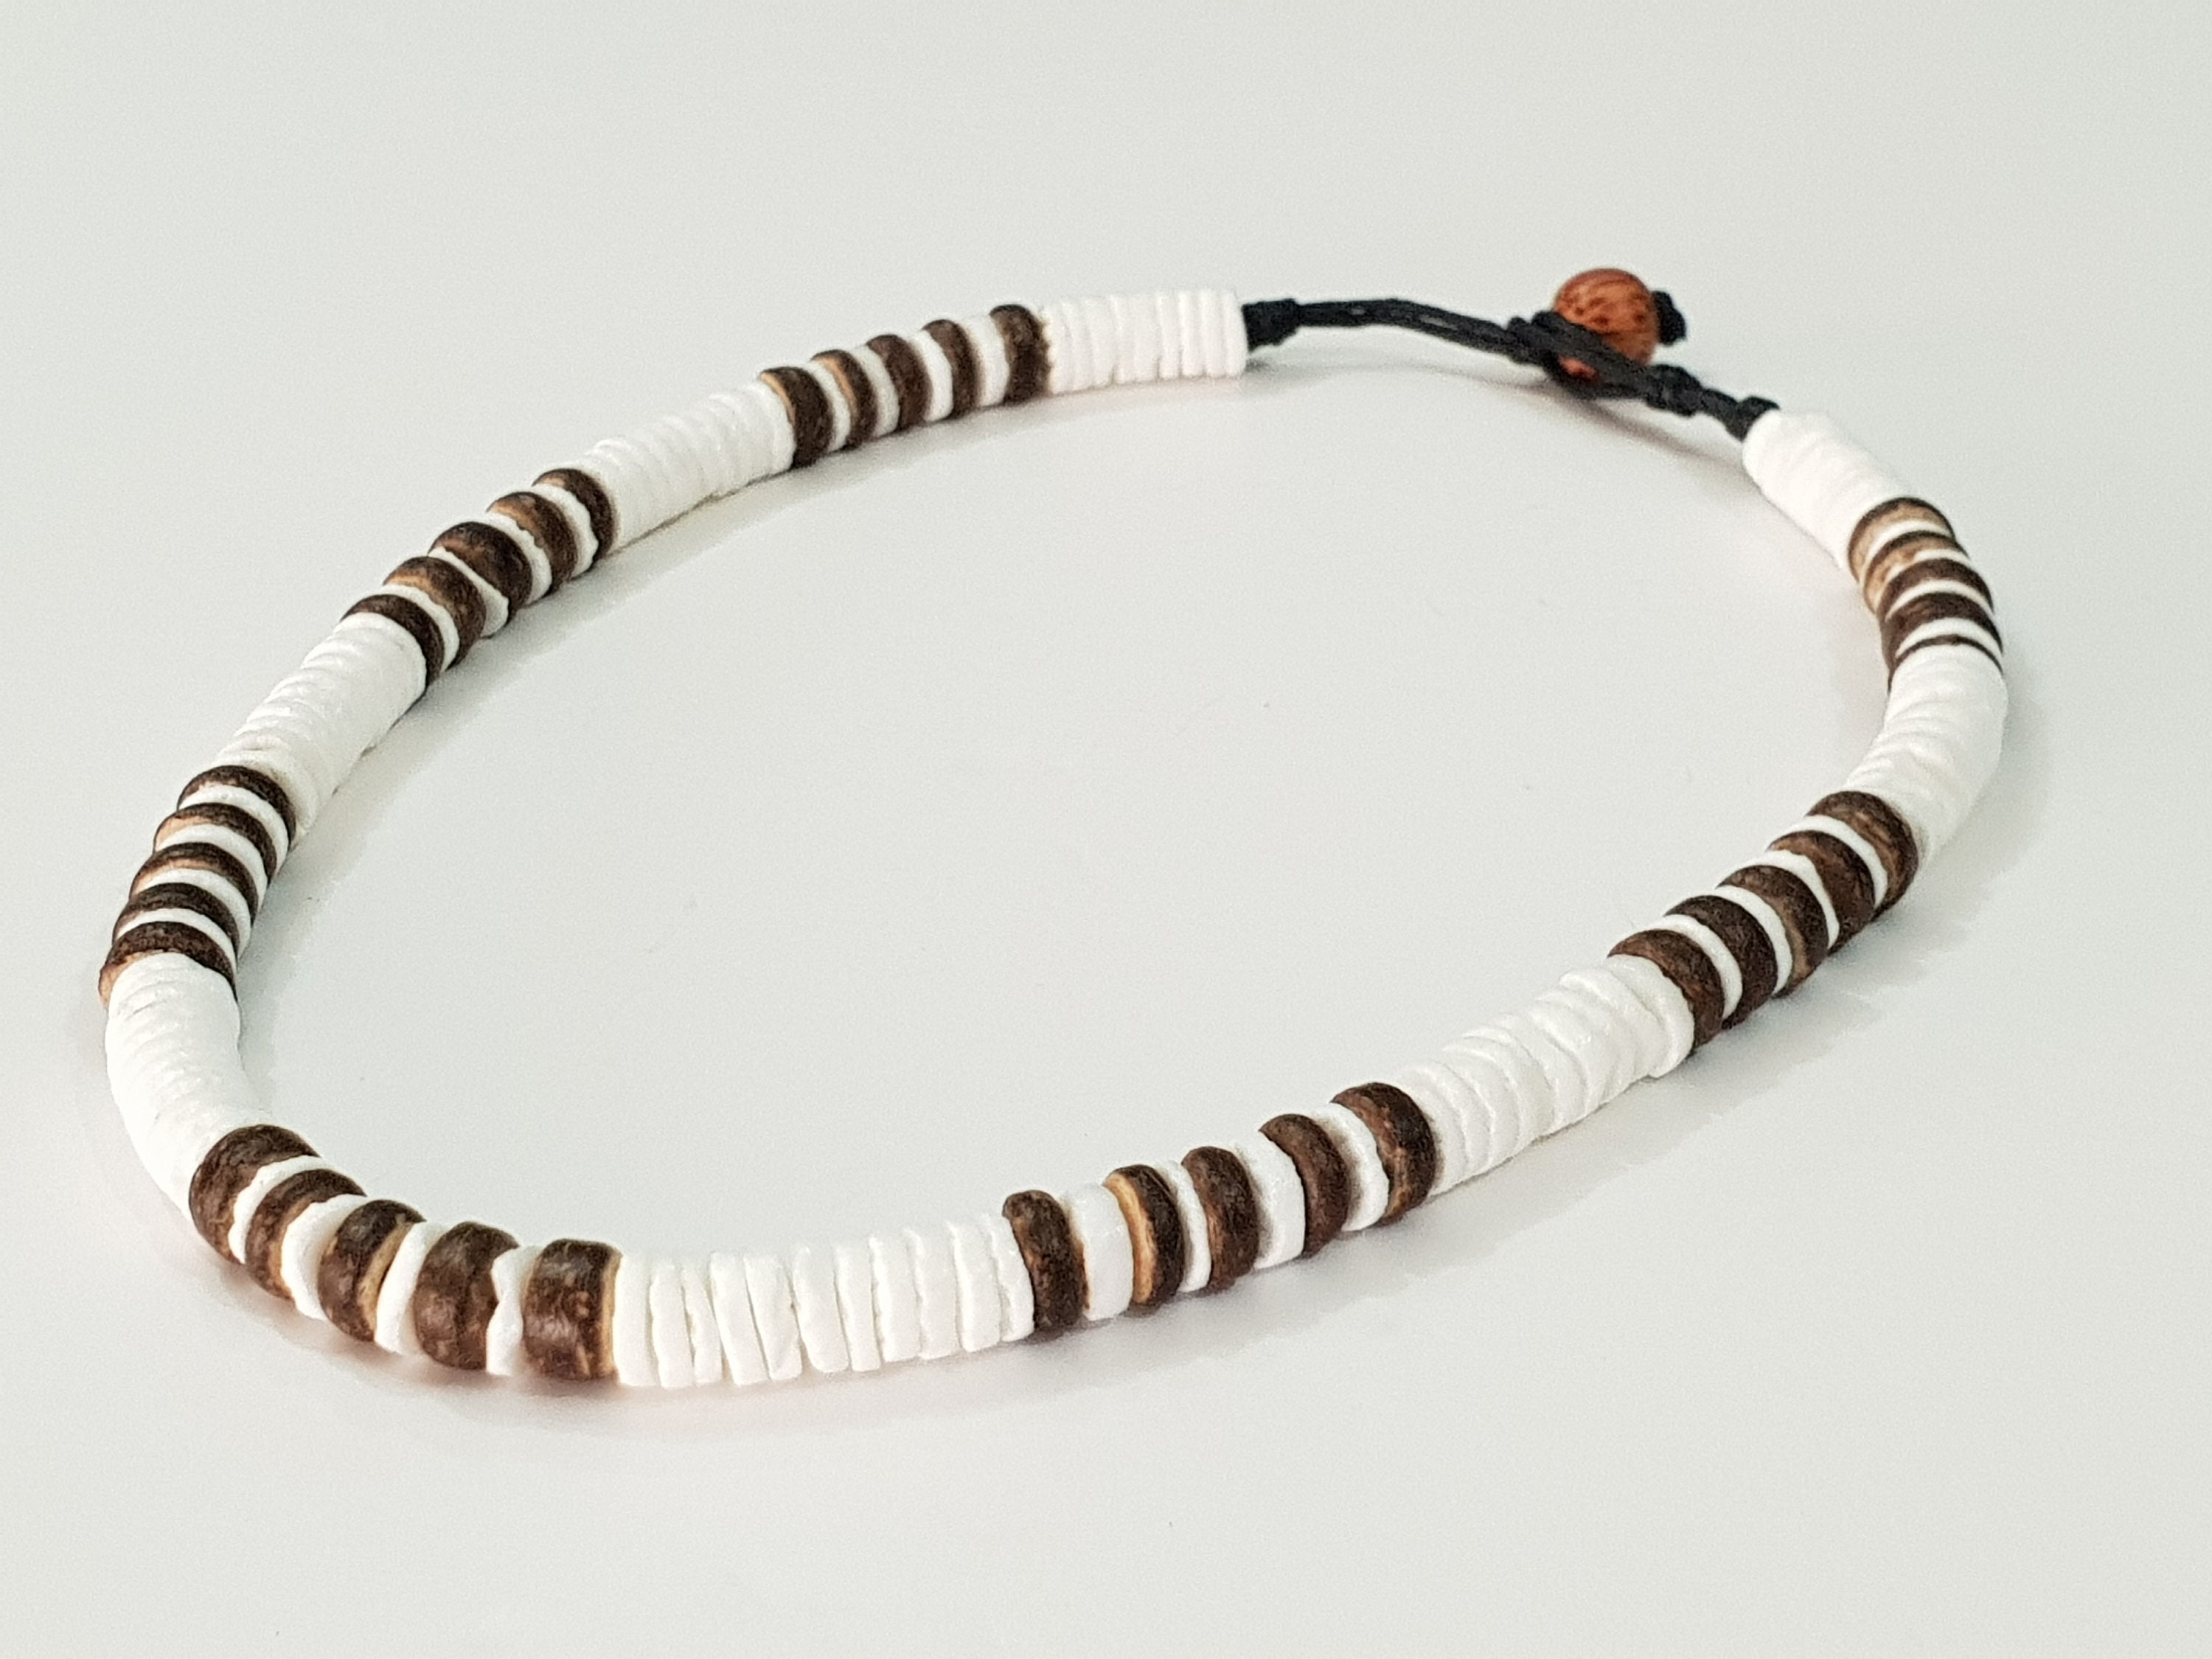 Boho Tropical Puka Shell Choker Necklace Flipkart For Women And Men Perfect  For Surfing And Beach Activities From Fujinplea, $22.11 | DHgate.Com